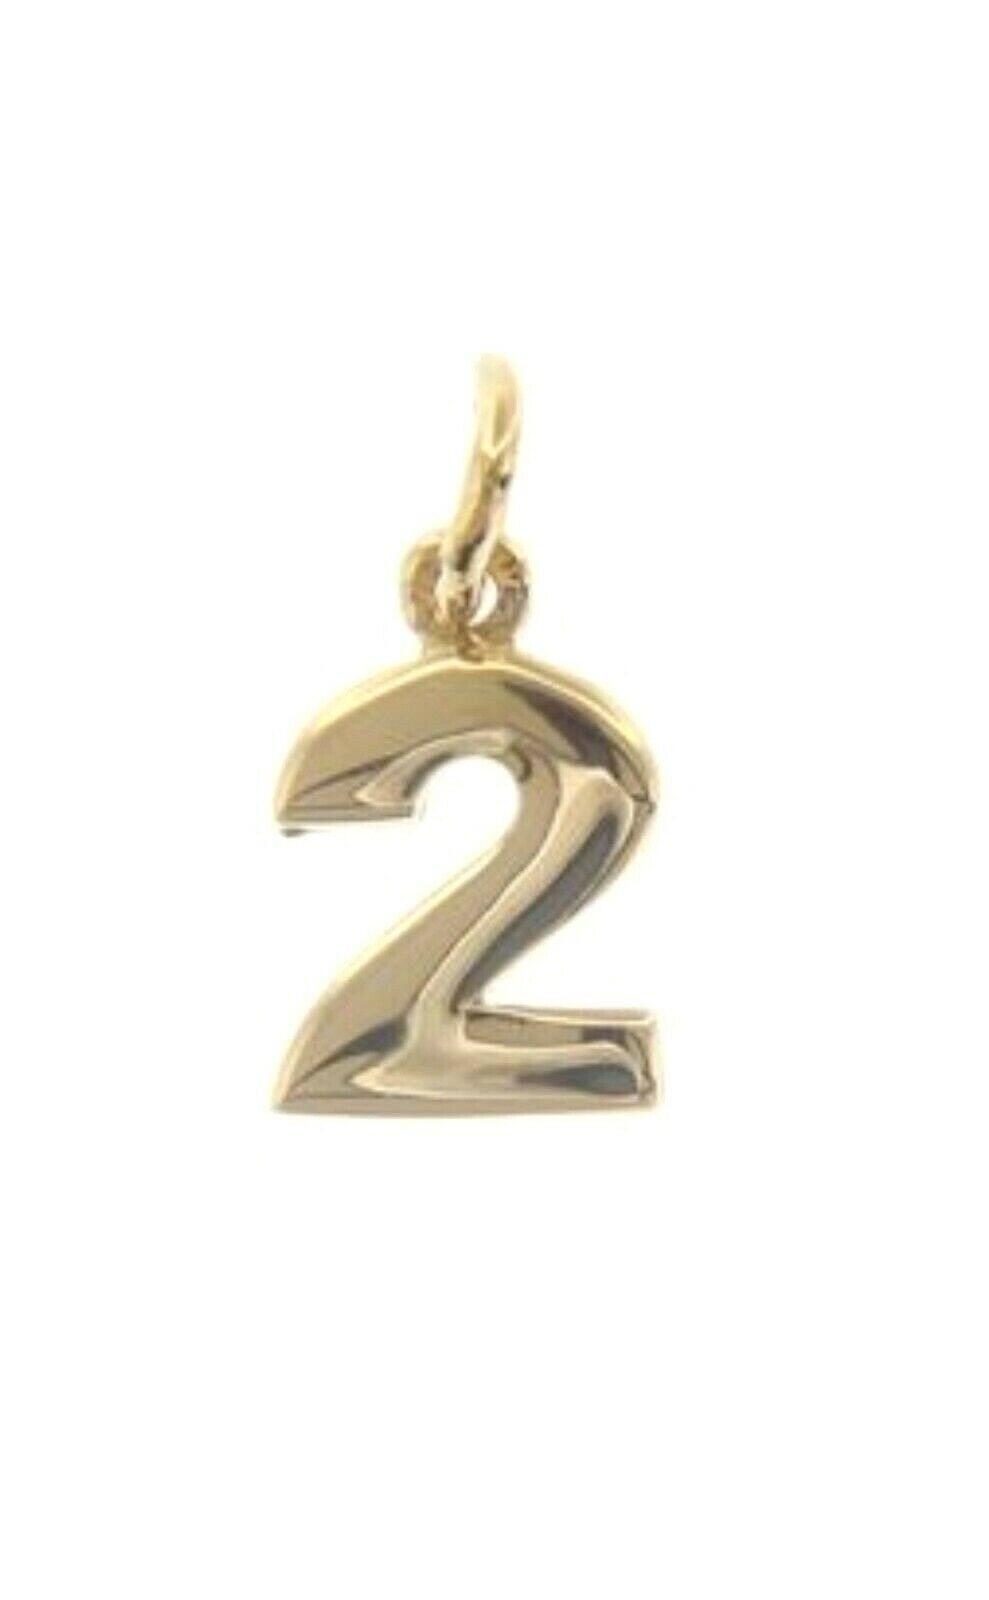 18k yellow gold number 2 two small pendant charm, 0.4